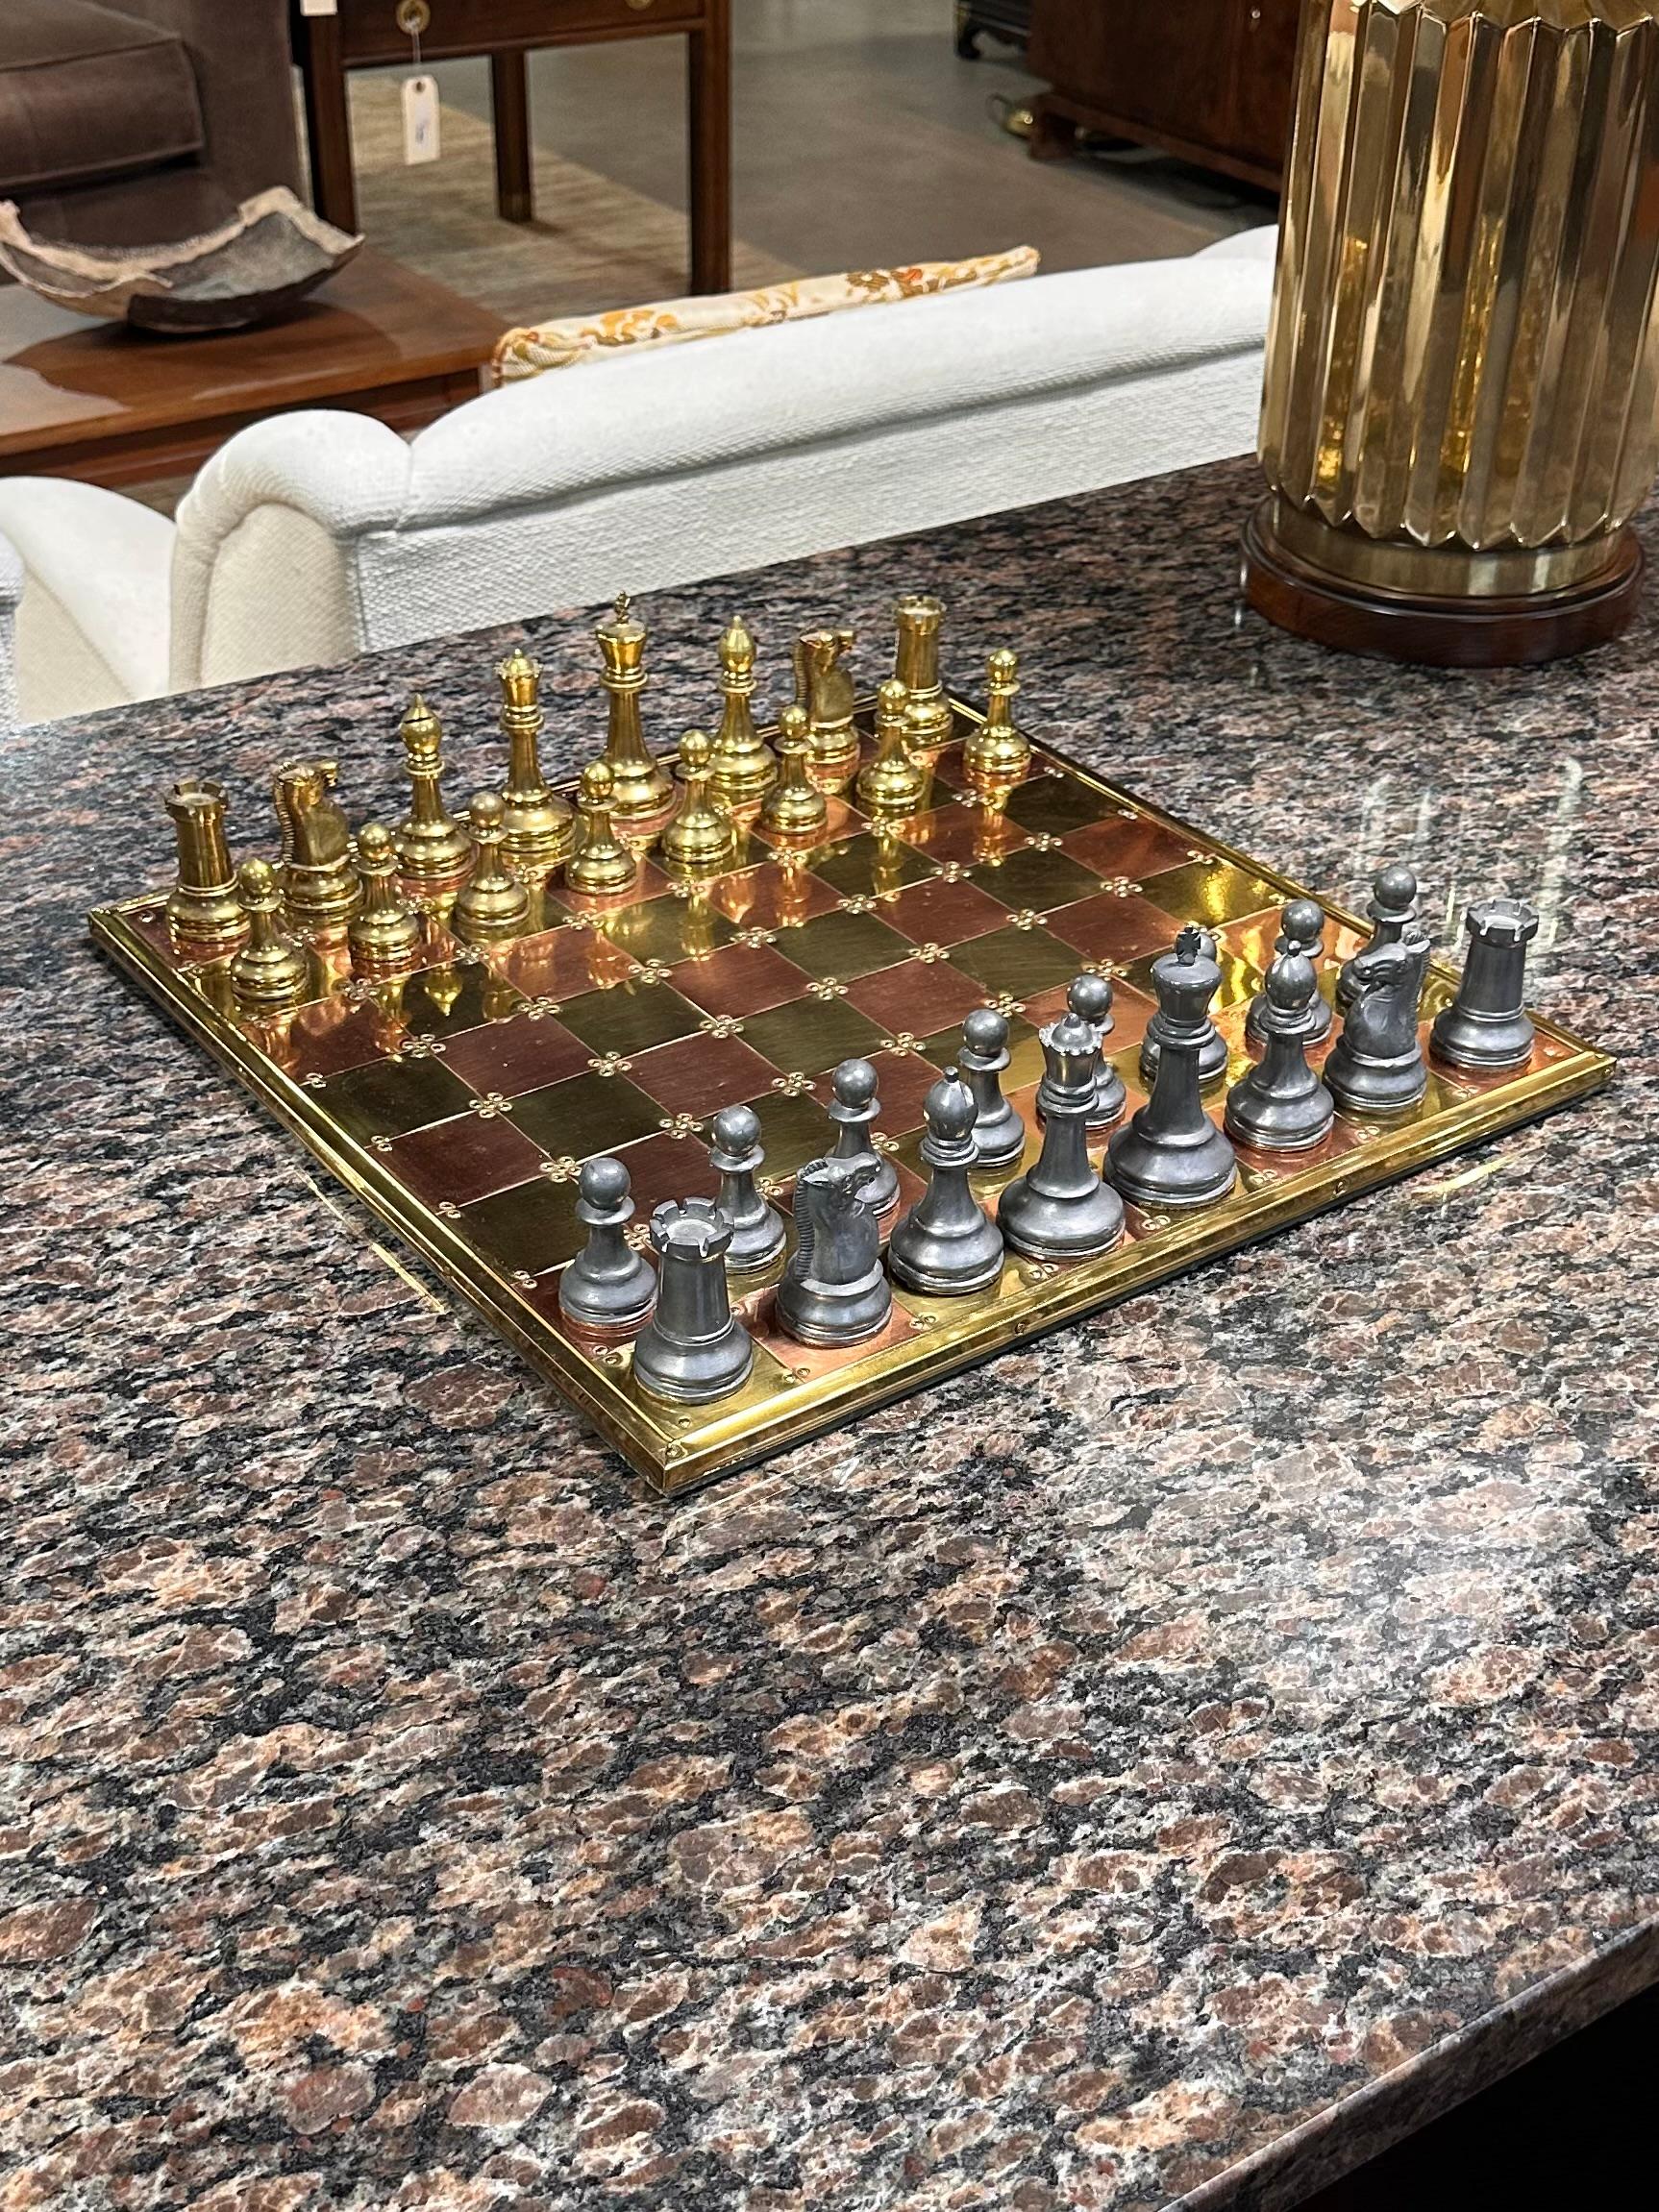 Vintage English Brass, Copper, and Pewter Chess Set

This is a very fine English brass, copper, and pewter gaming set, dating to the late 20th century, circa 1980. The chess board is constructed of 64 copper and brass squares, each with a shimmering